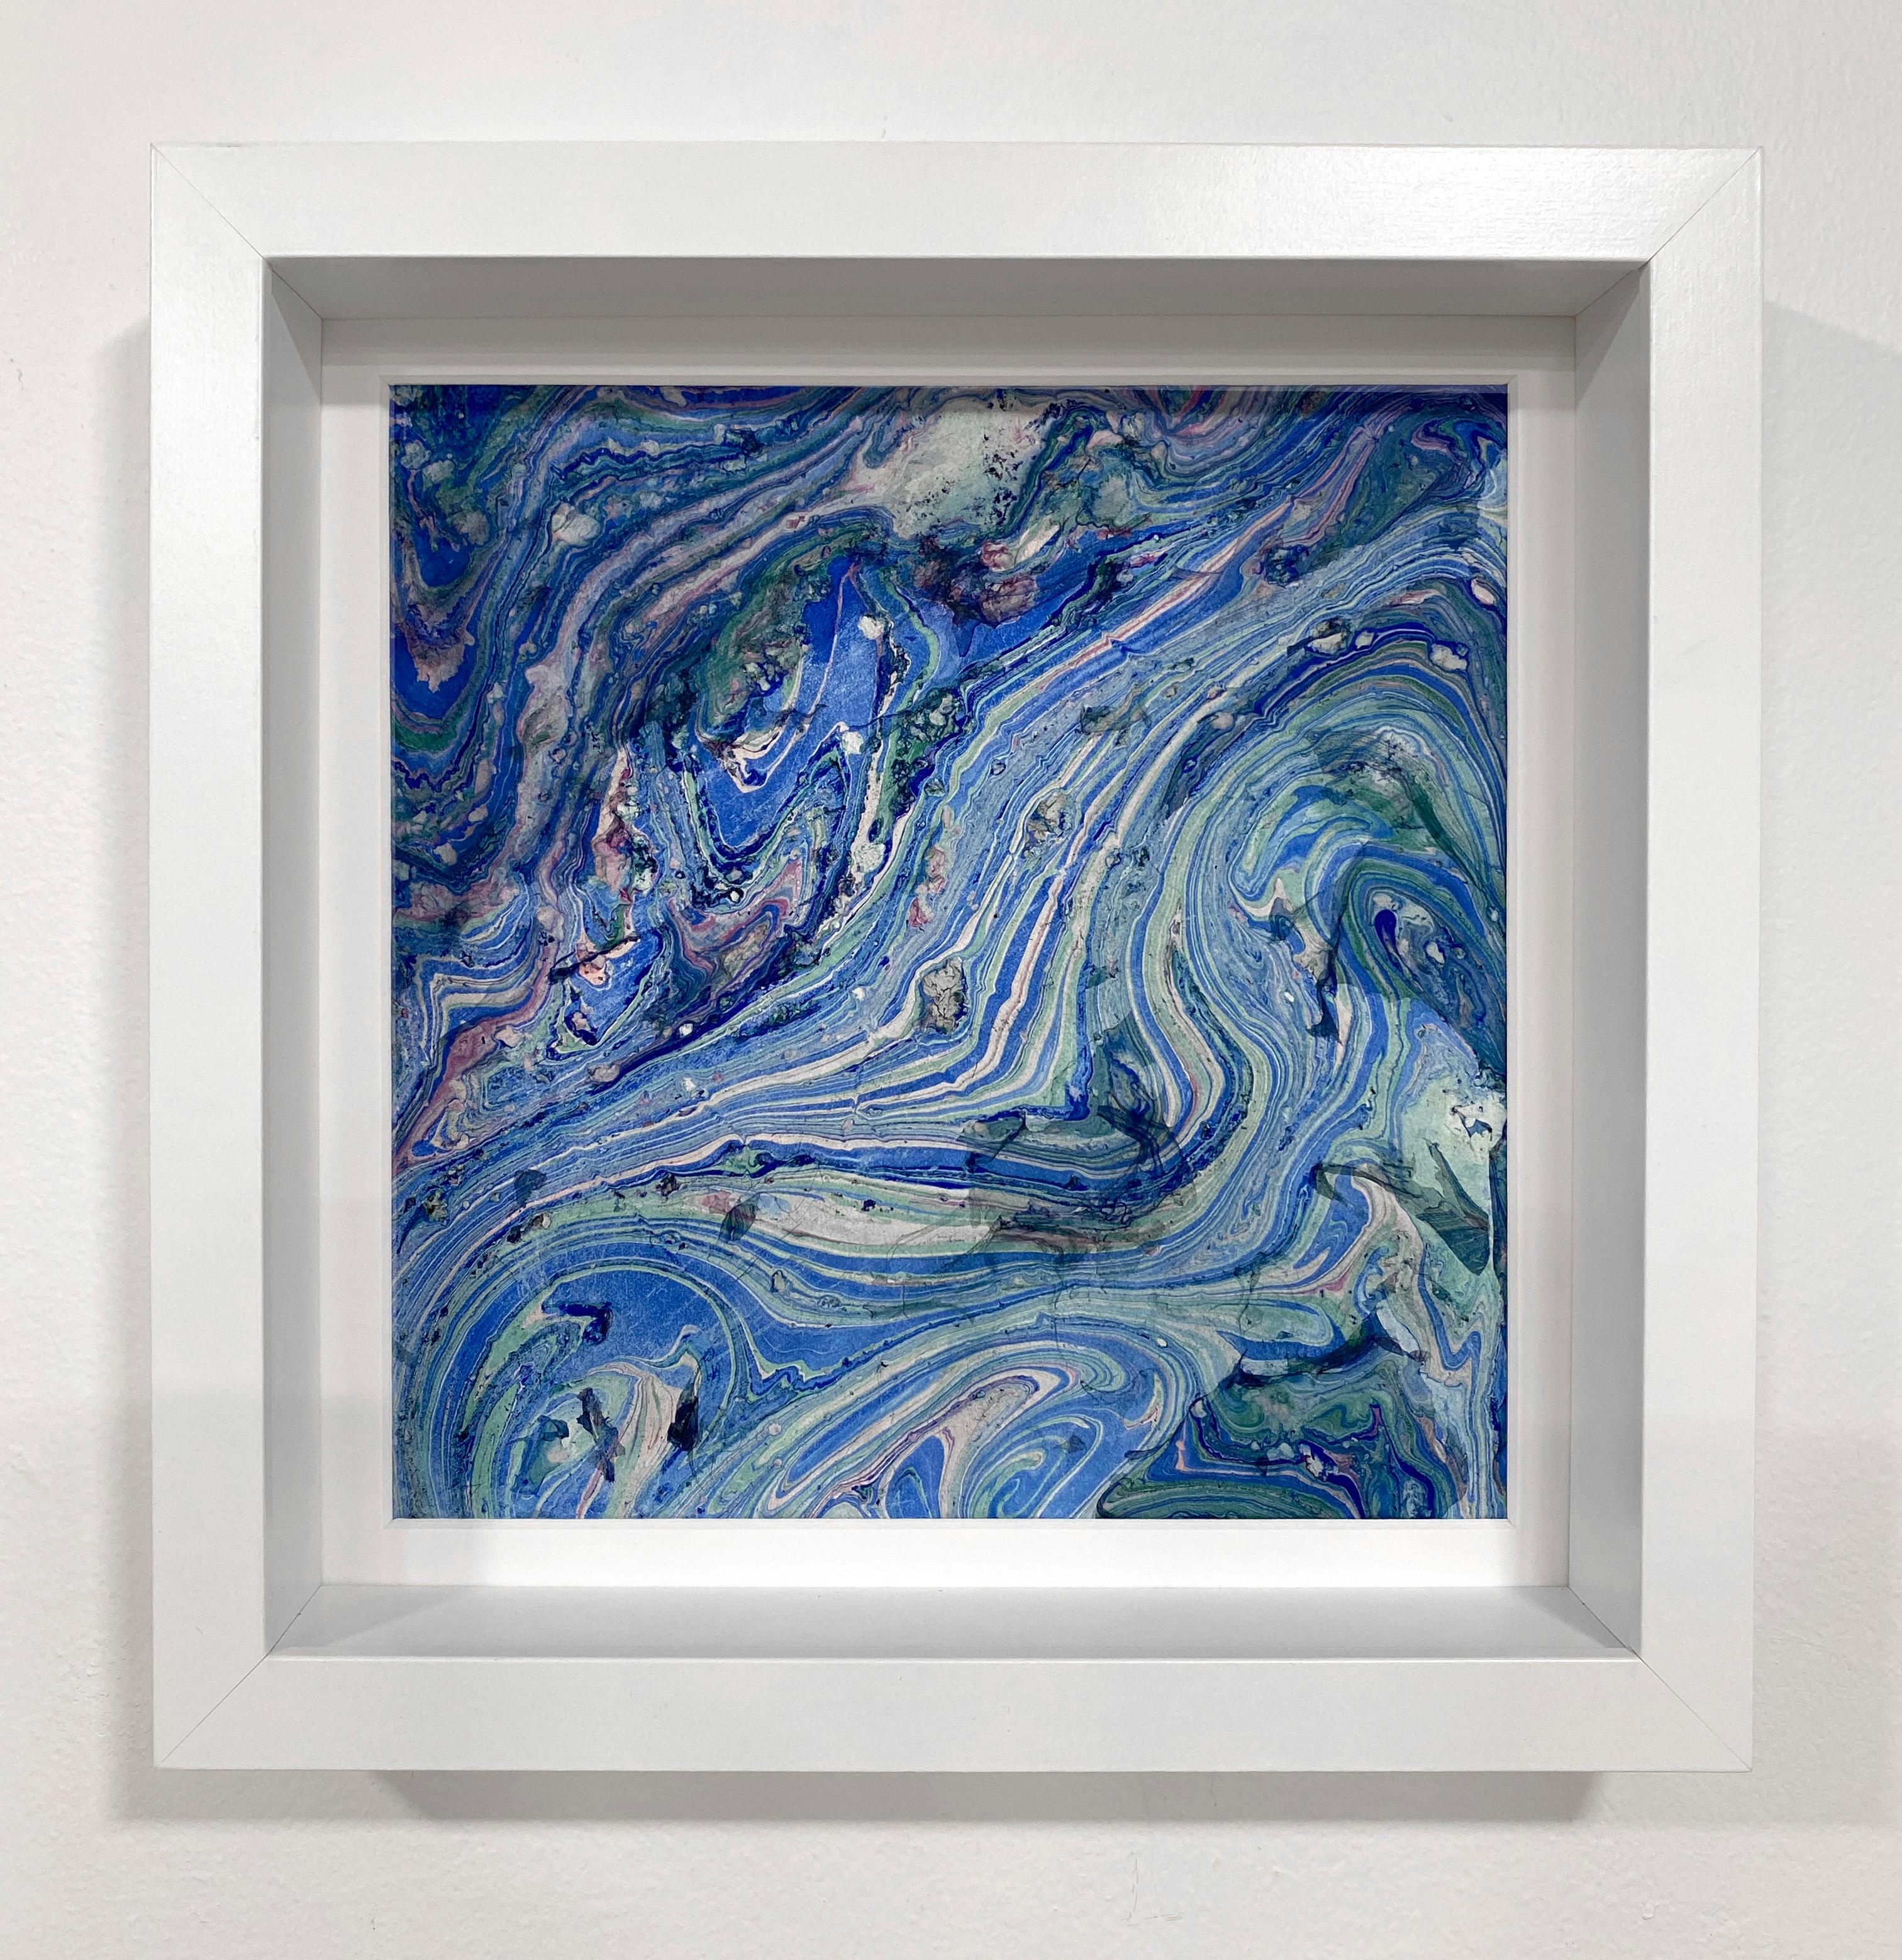 Rachel Kohn Abstract Painting - Marbled Scape, blue marble abstract landscape / seascape / night sky